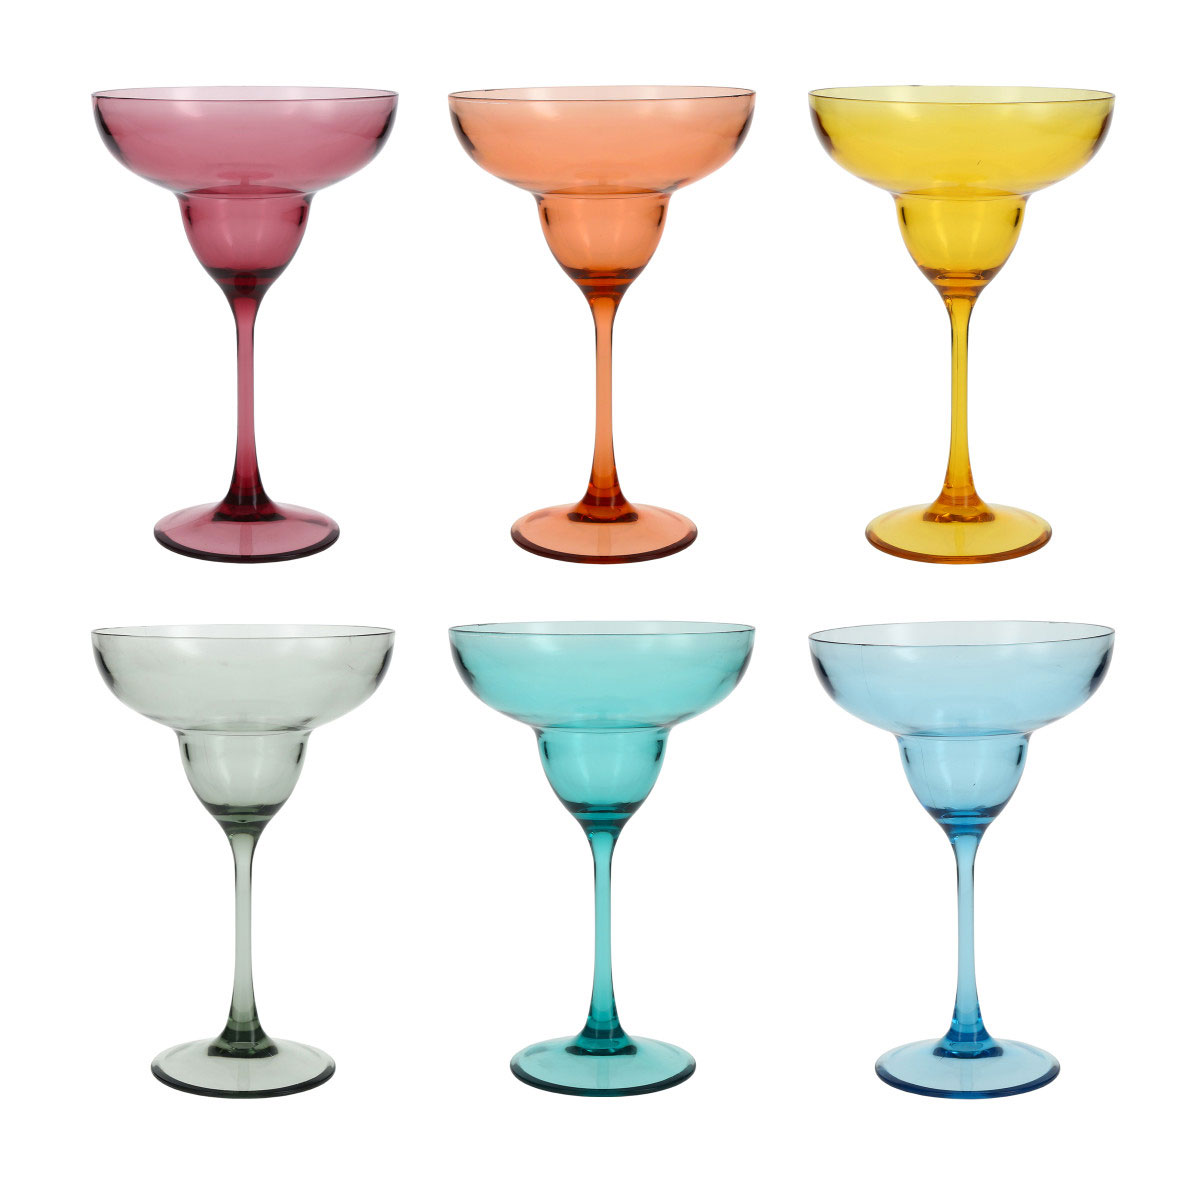 Fortessa Copolyester Glass Outside Margarita 10oz, Assorted Colors - Set of 6